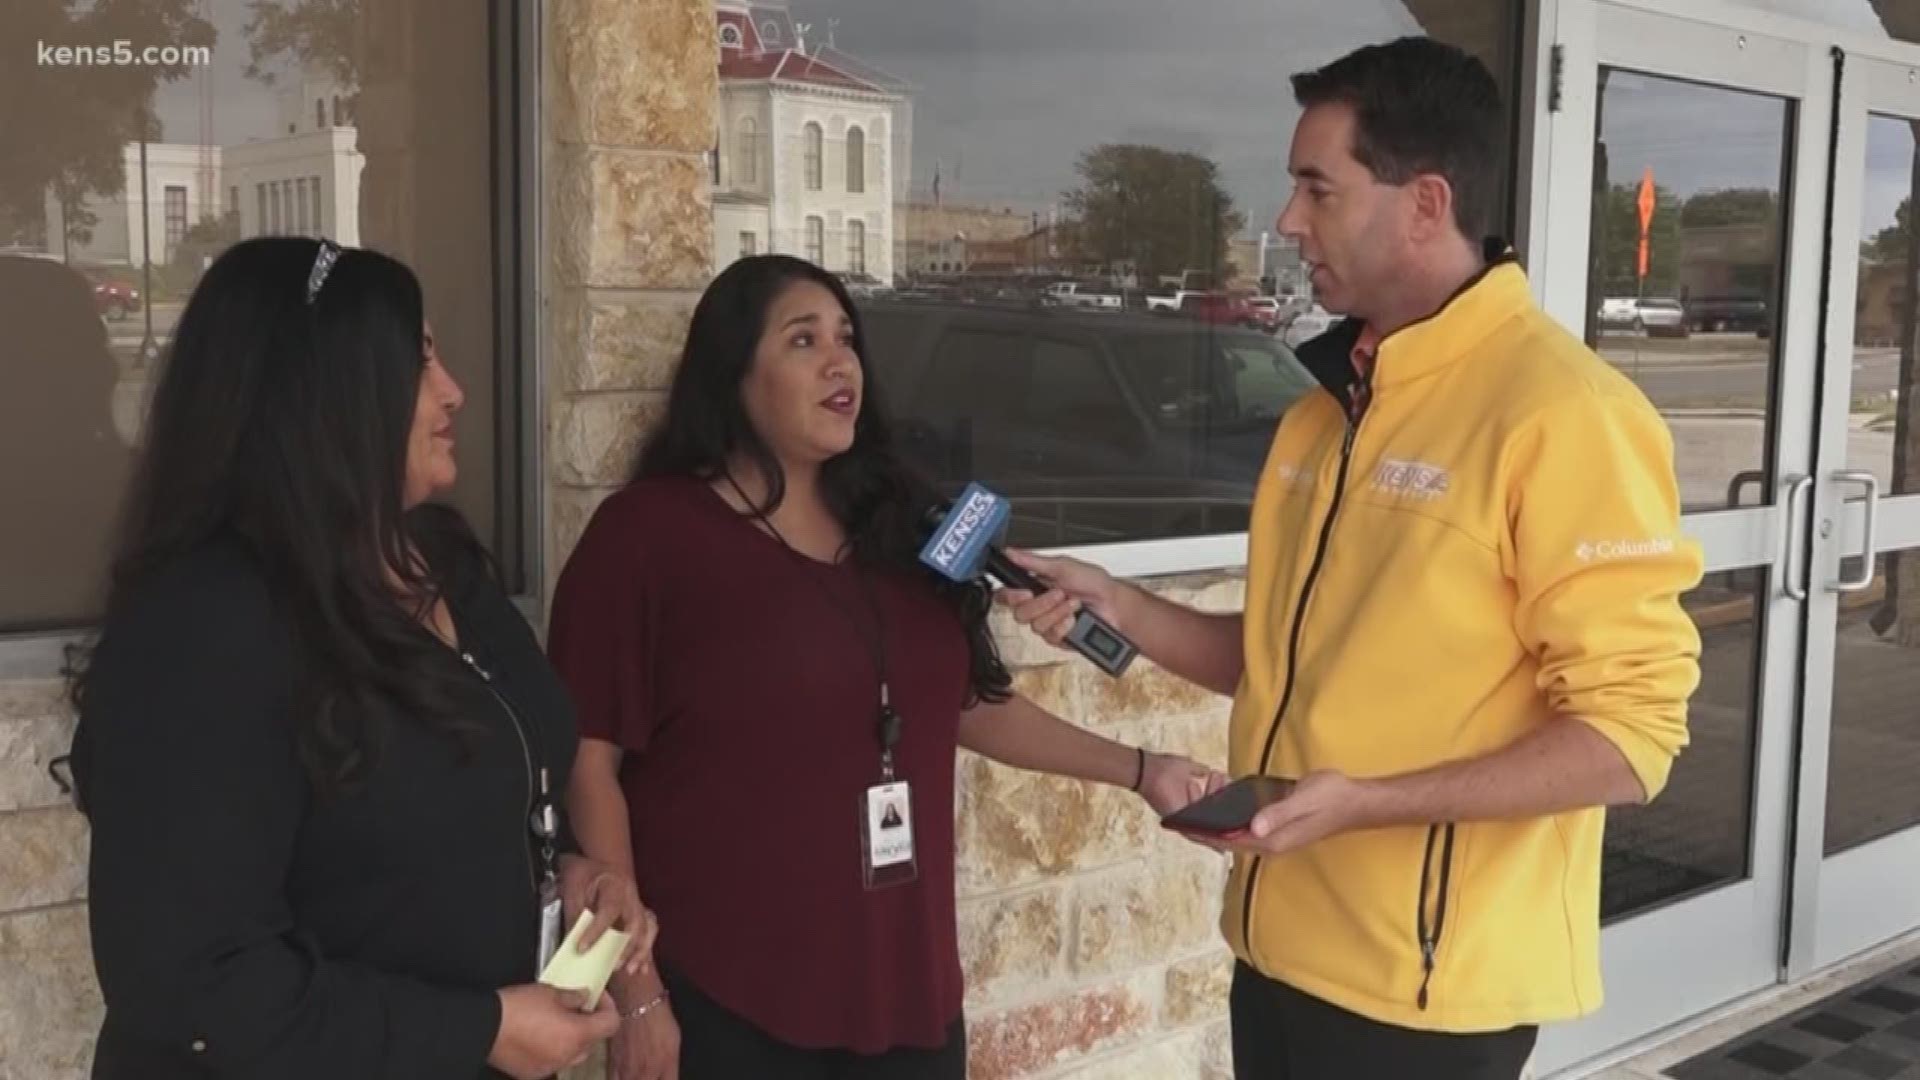 A Floresville man is celebrating a $5 million Mega Millions win. He won the prize last Tuesday after buying a ticket at a downtown San Antonio store. Eyewitness News reporter Jeremy Baker has more.